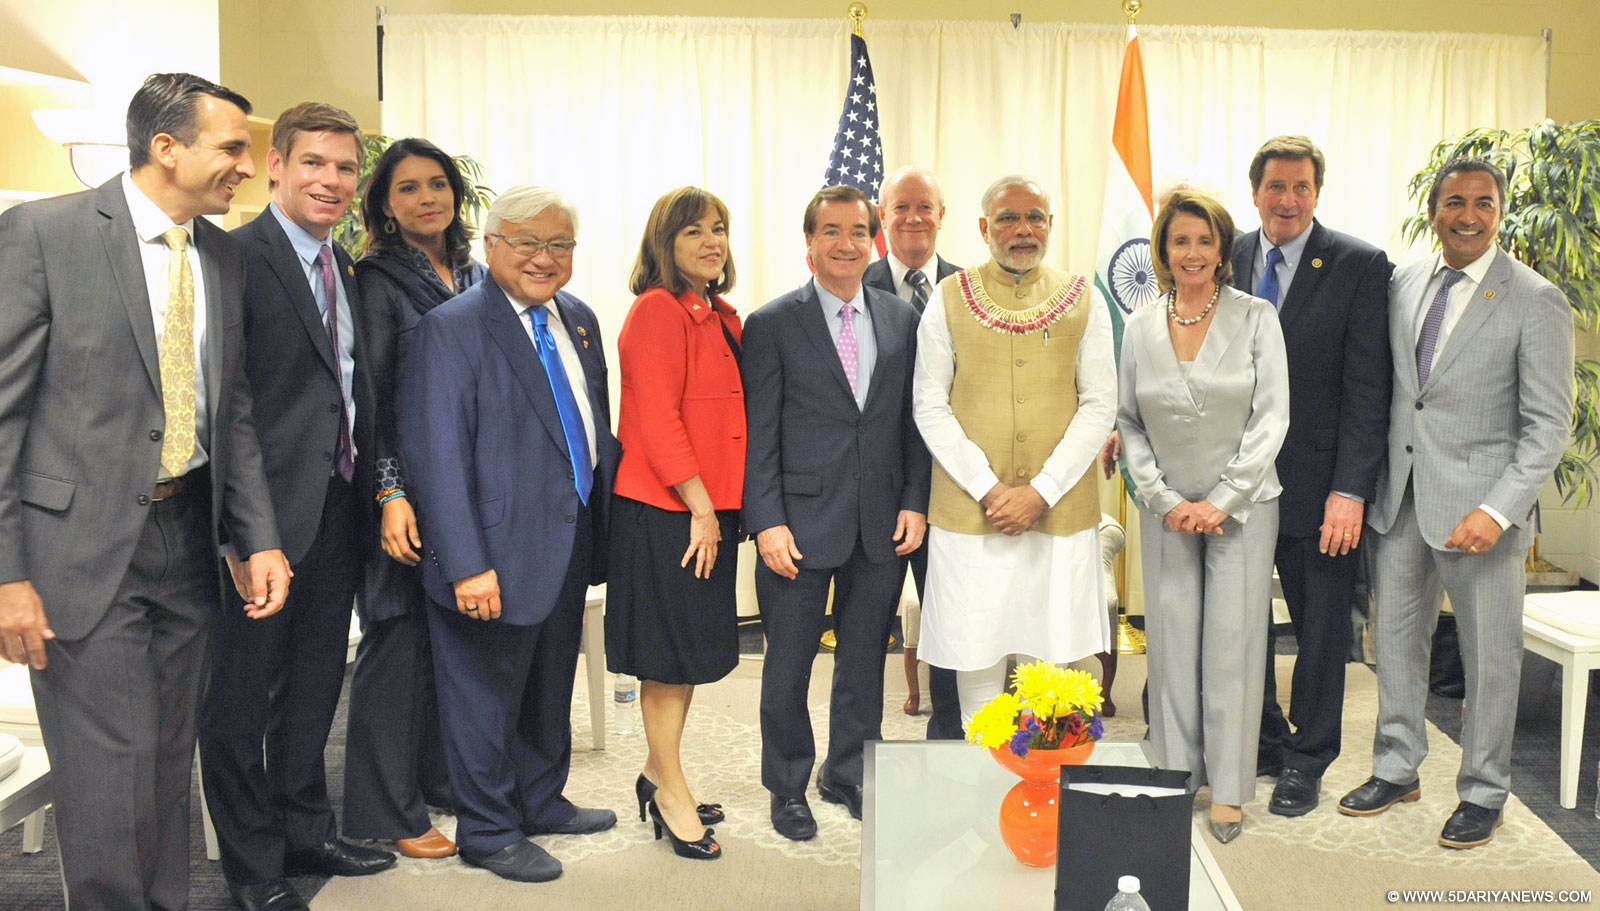 The Prime Minister, Shri Narendra Modi with the organisers and elected officials at the SAP Centre, in San Jose, California on September 27, 2015.